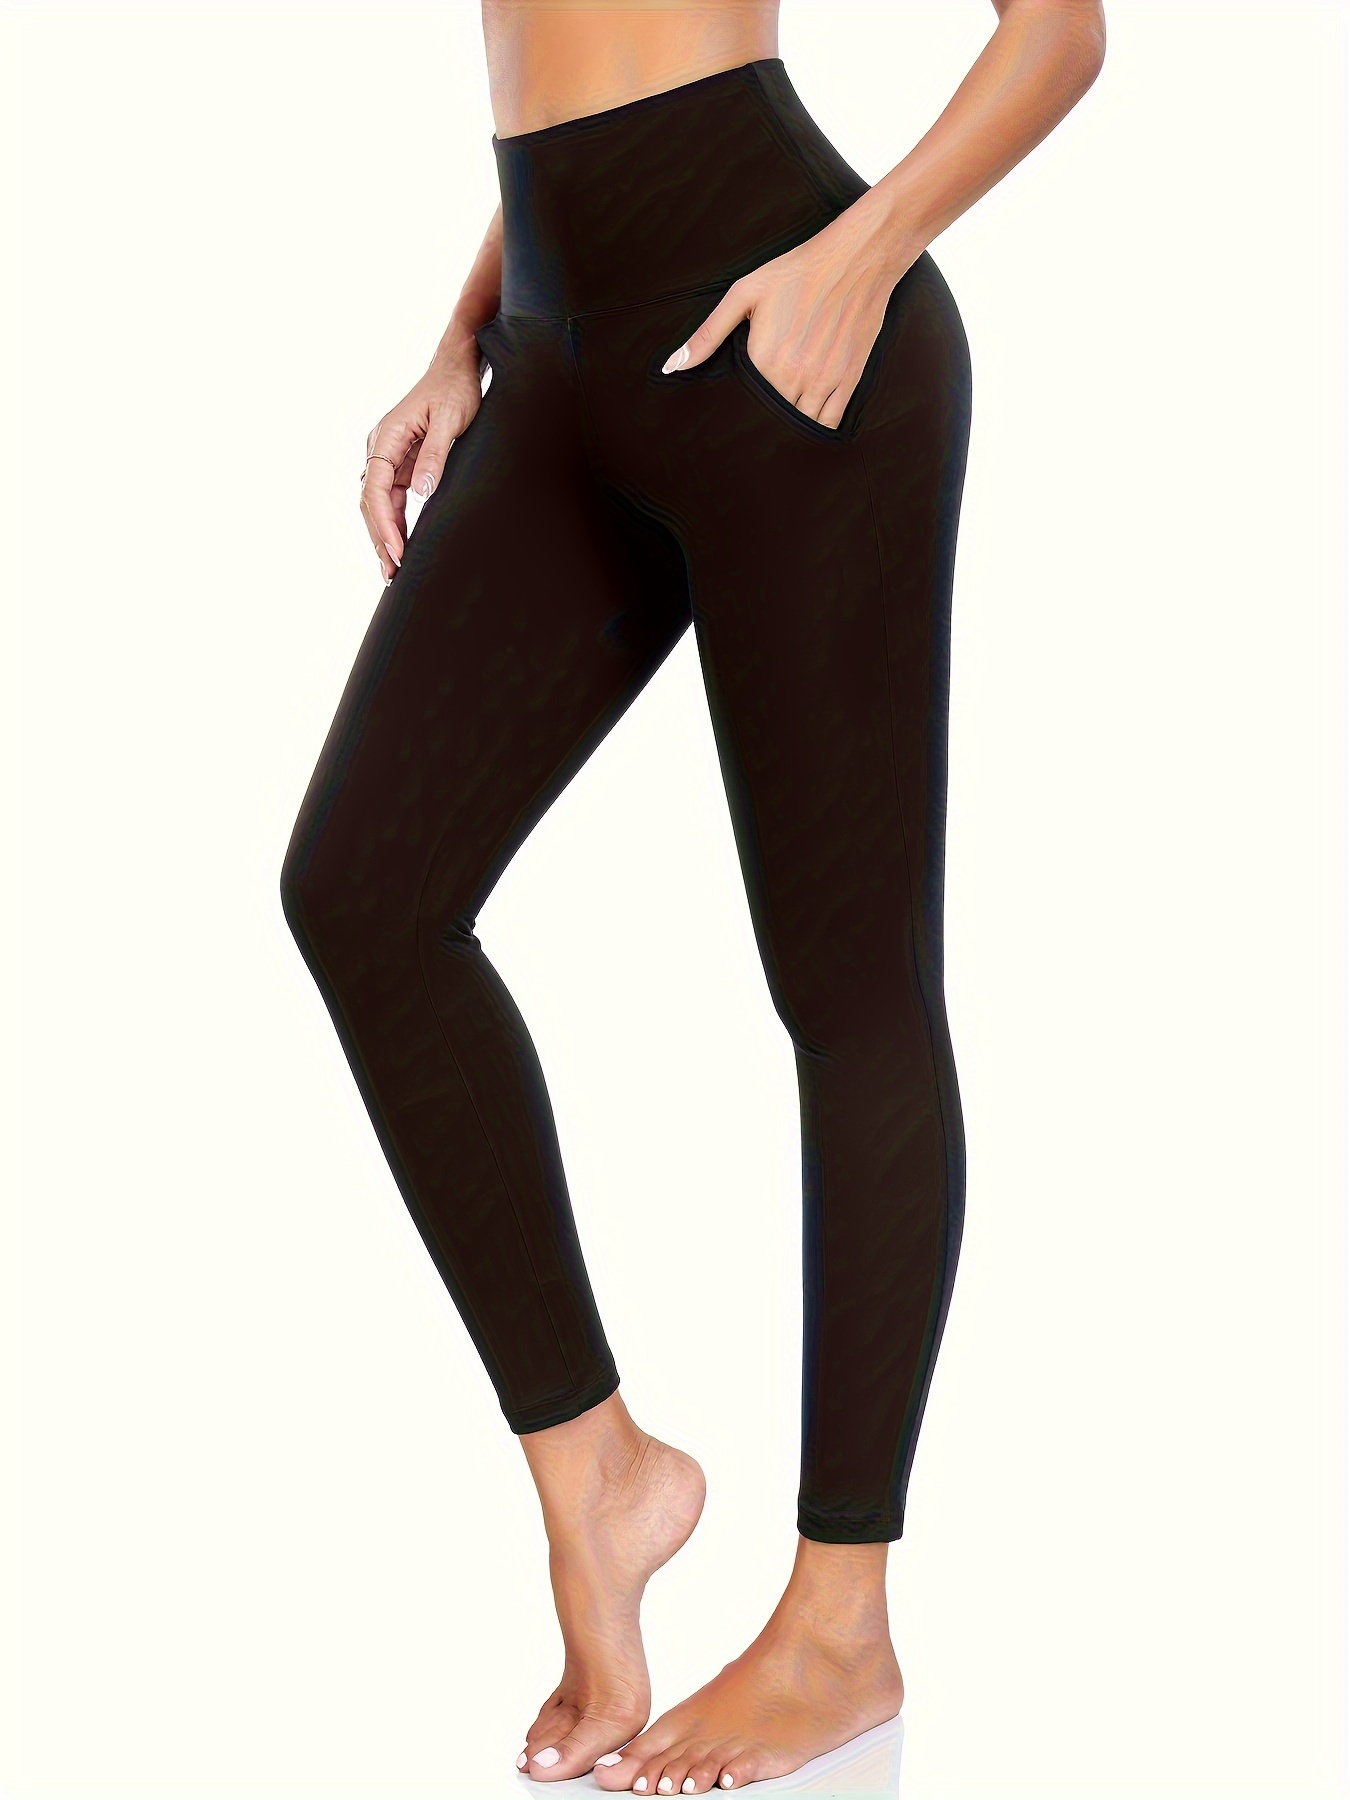 Stretchy Solid Color High Waist Winter Leggings Butt Lifting